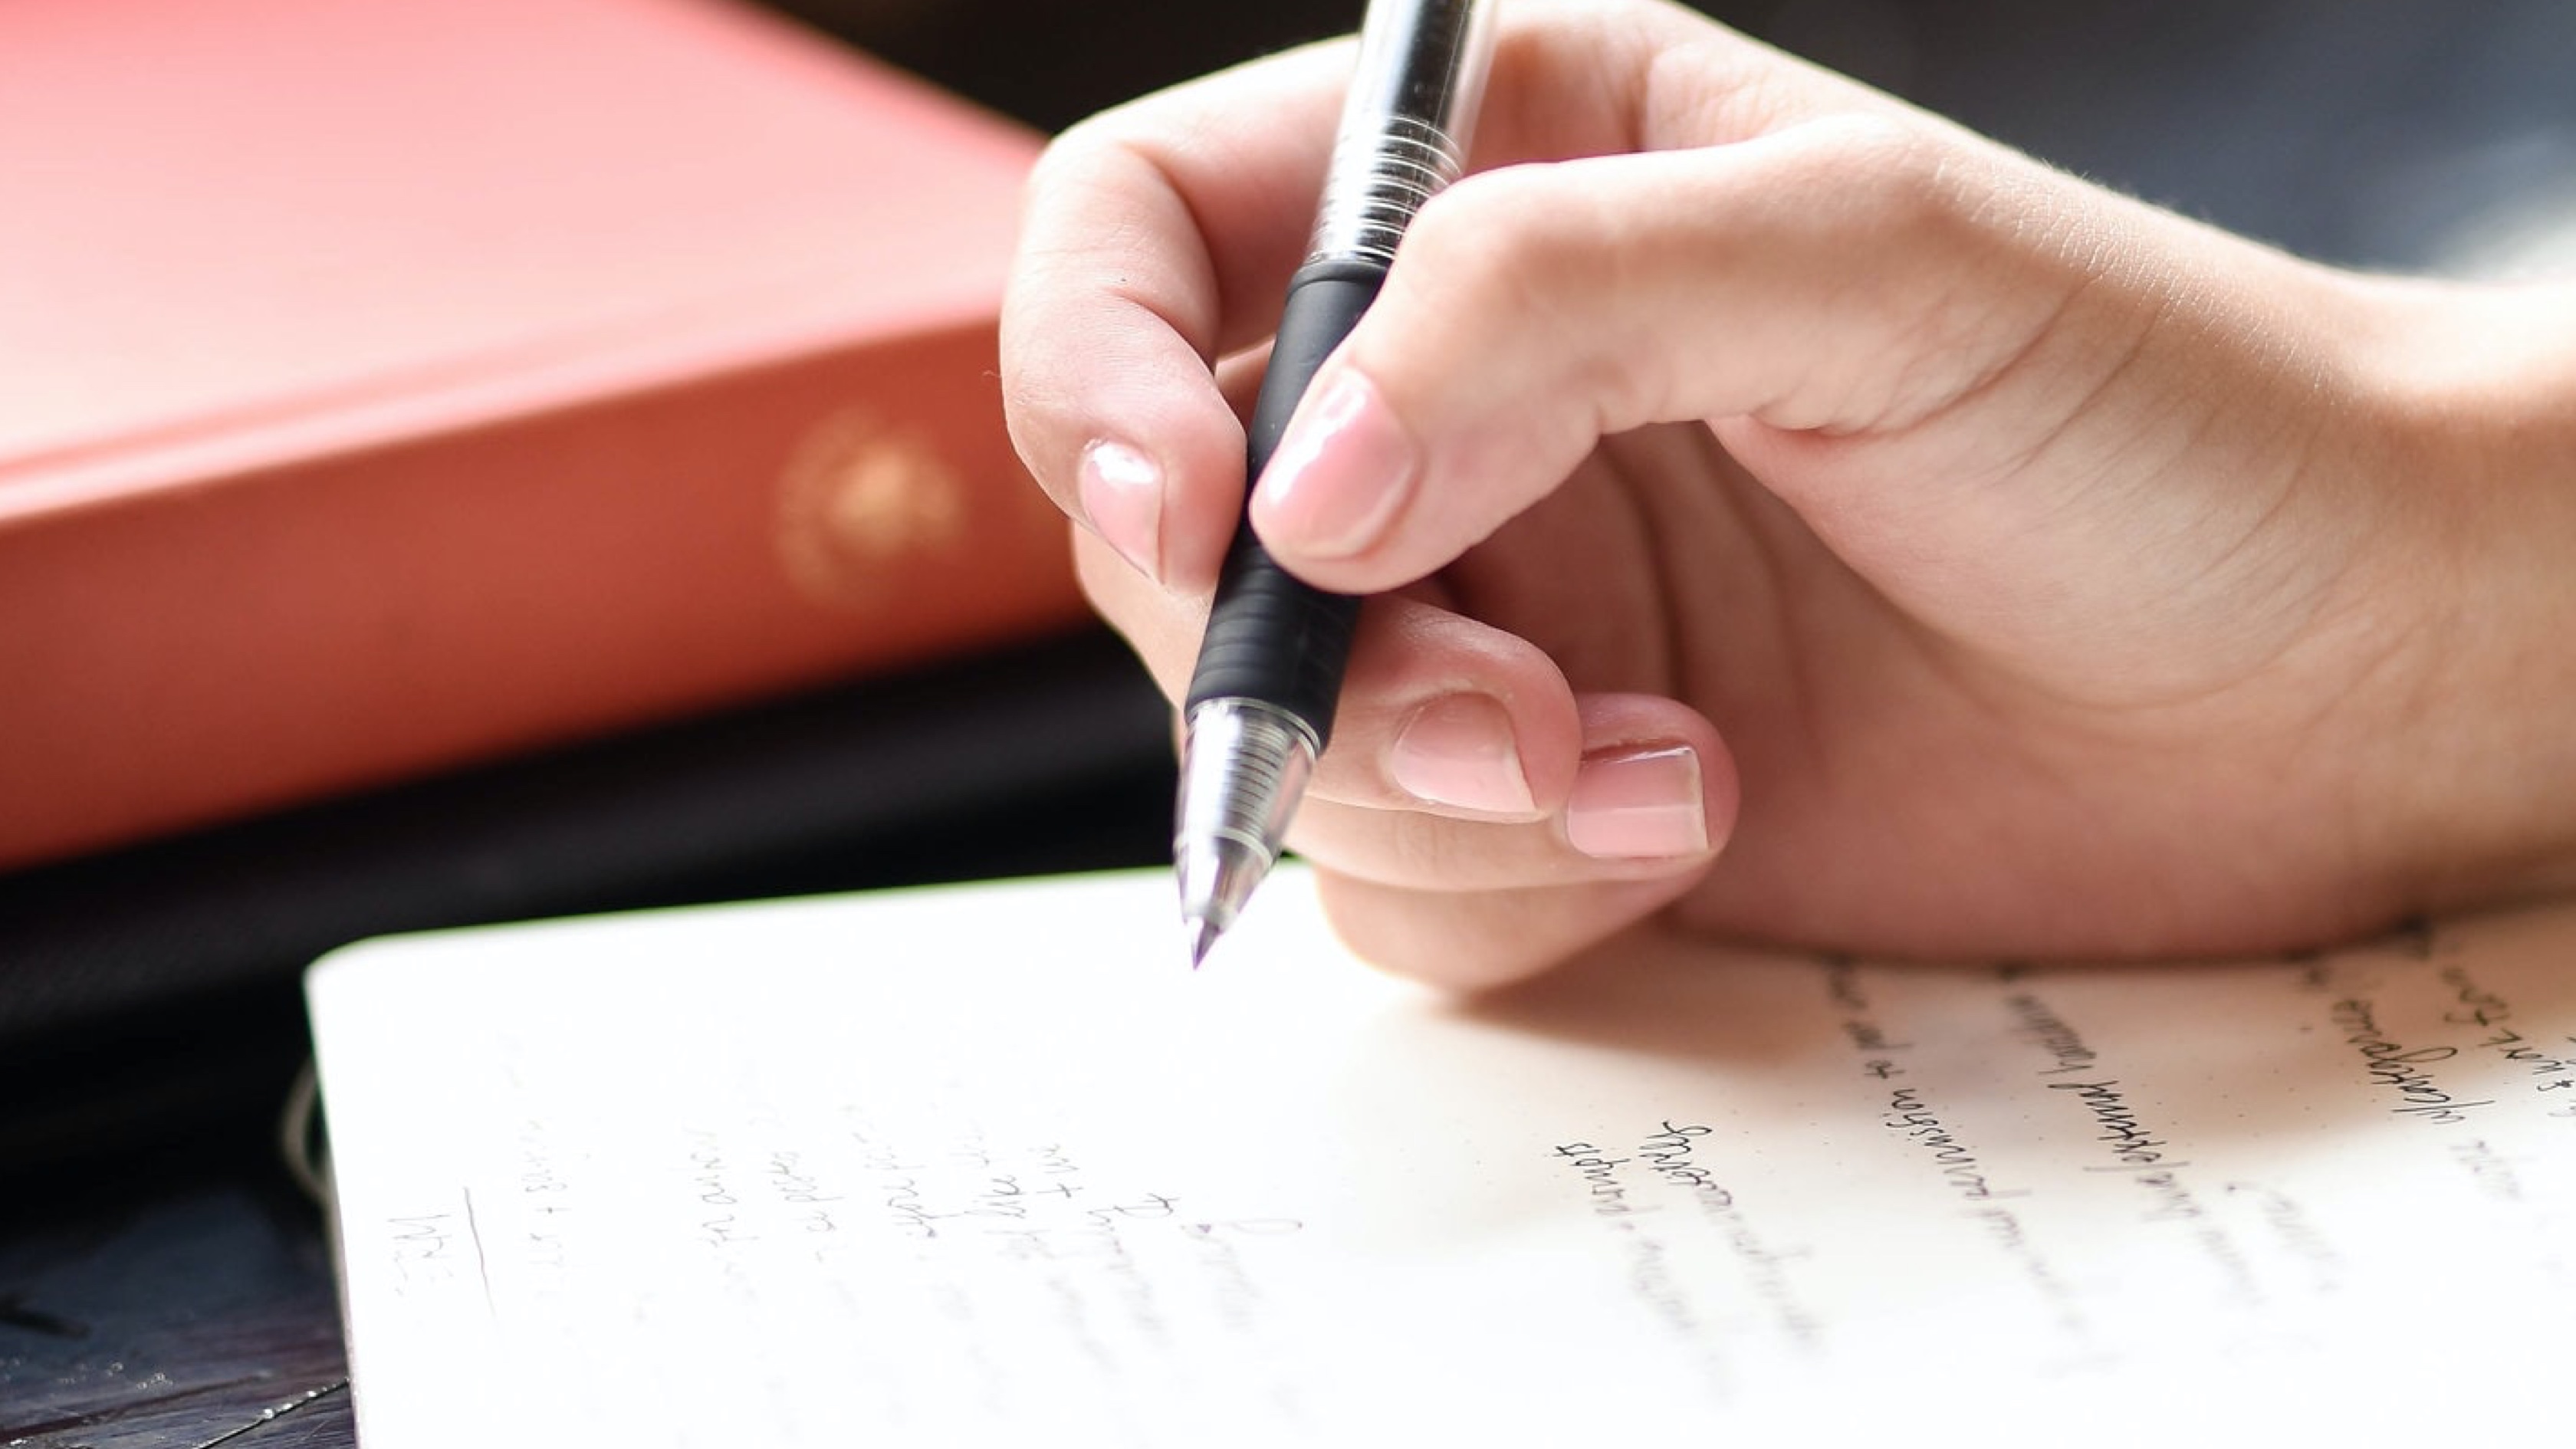 How Writing a Personal Contract Improved My Life